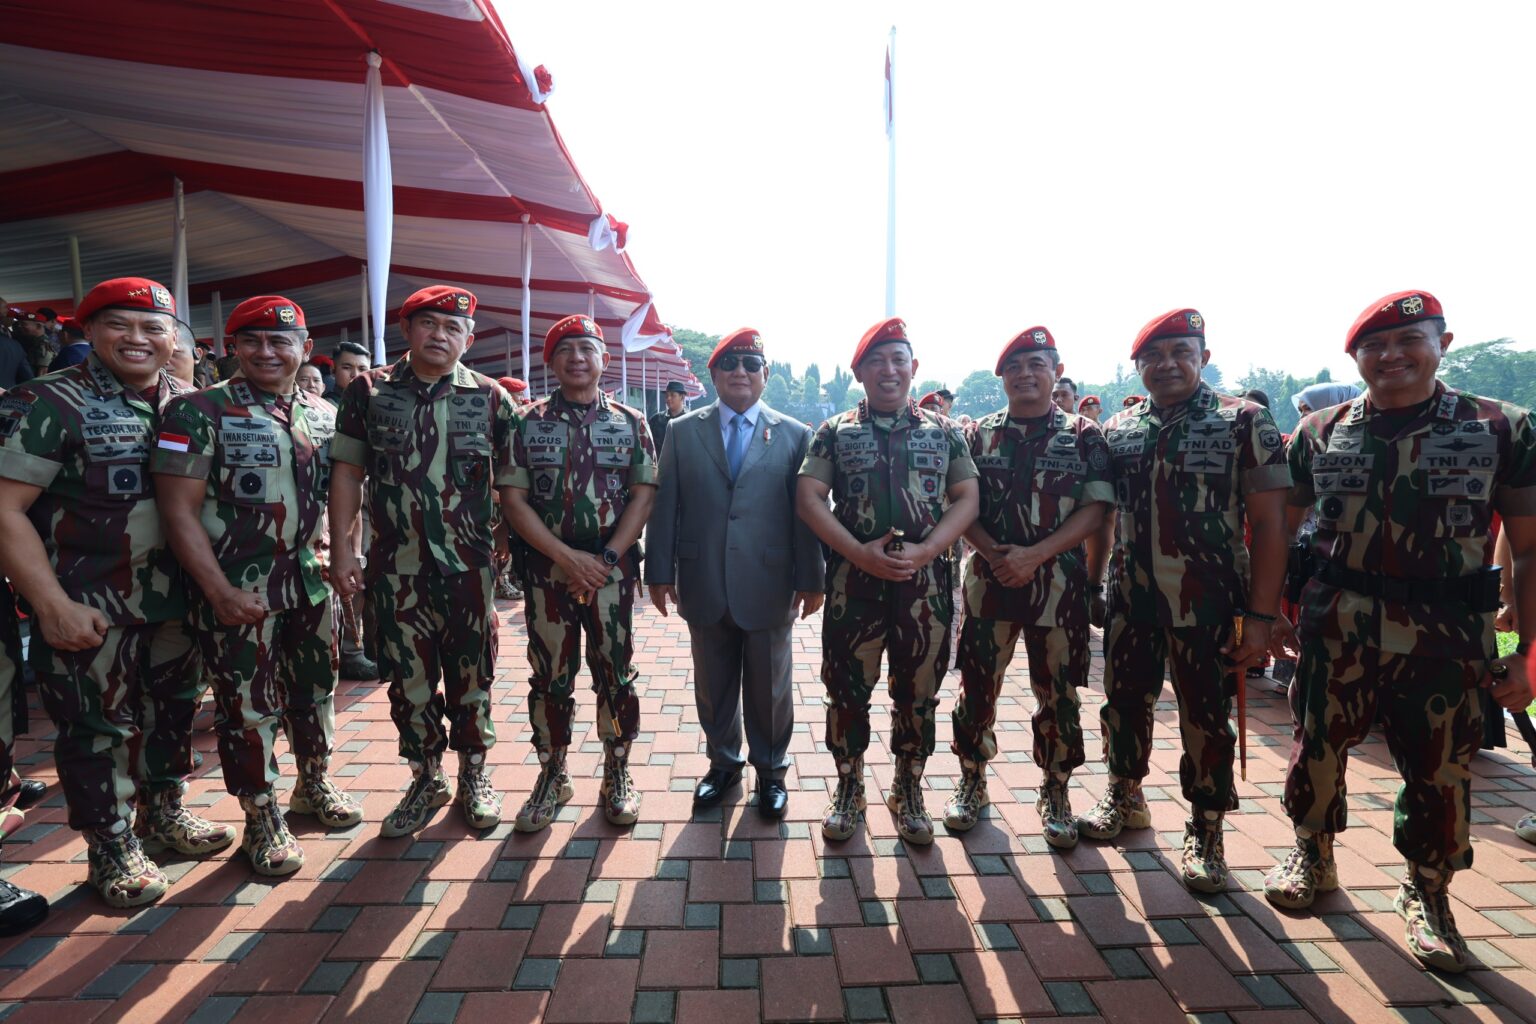 Prabowo Subianto Attends the 72nd Anniversary of Kopassus, Welcomed by Thunderous Applause